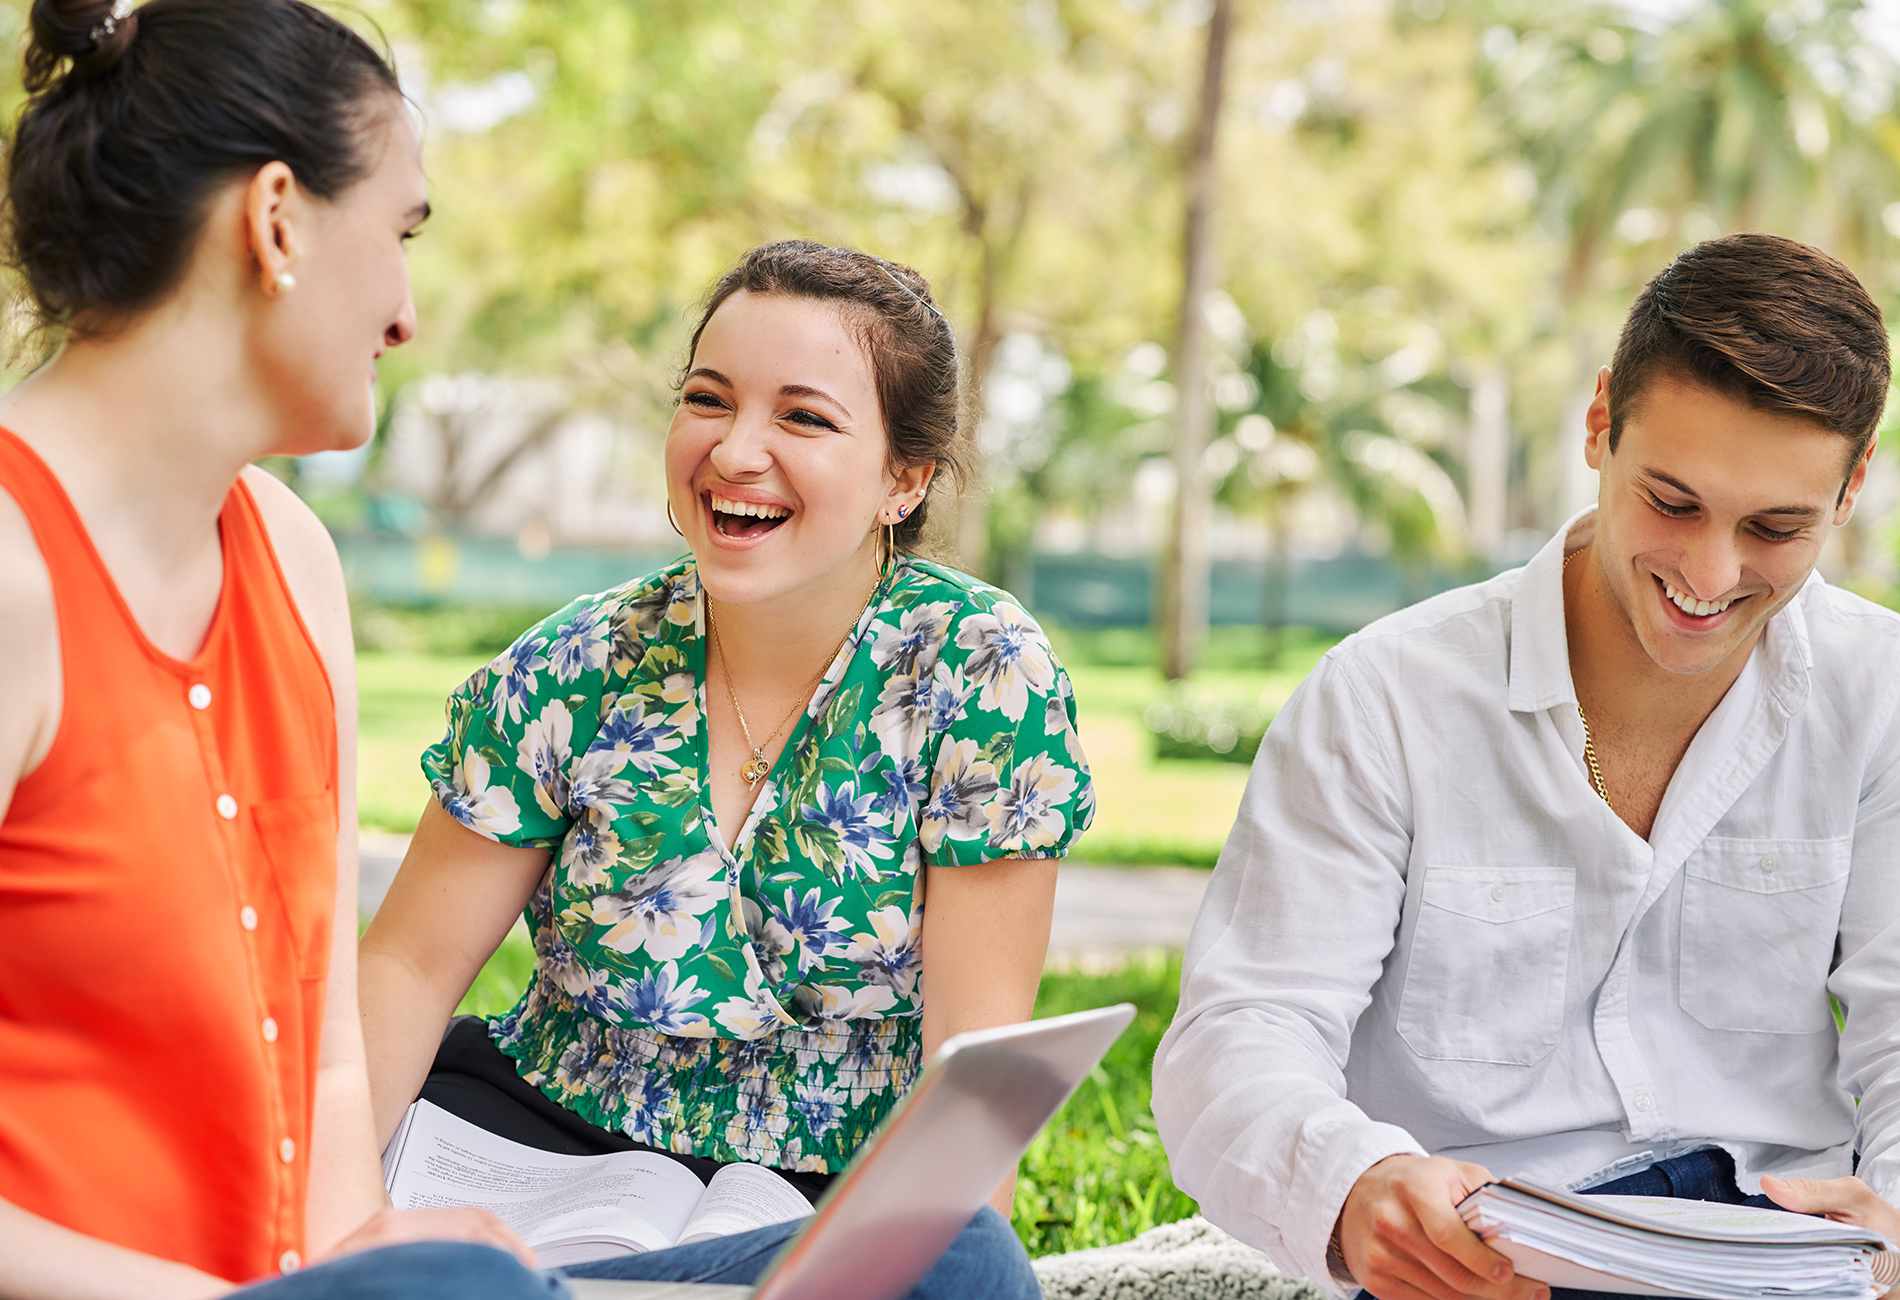 Students sitting on campus grounds. Students laughing while doing group work. Outdoor group work.